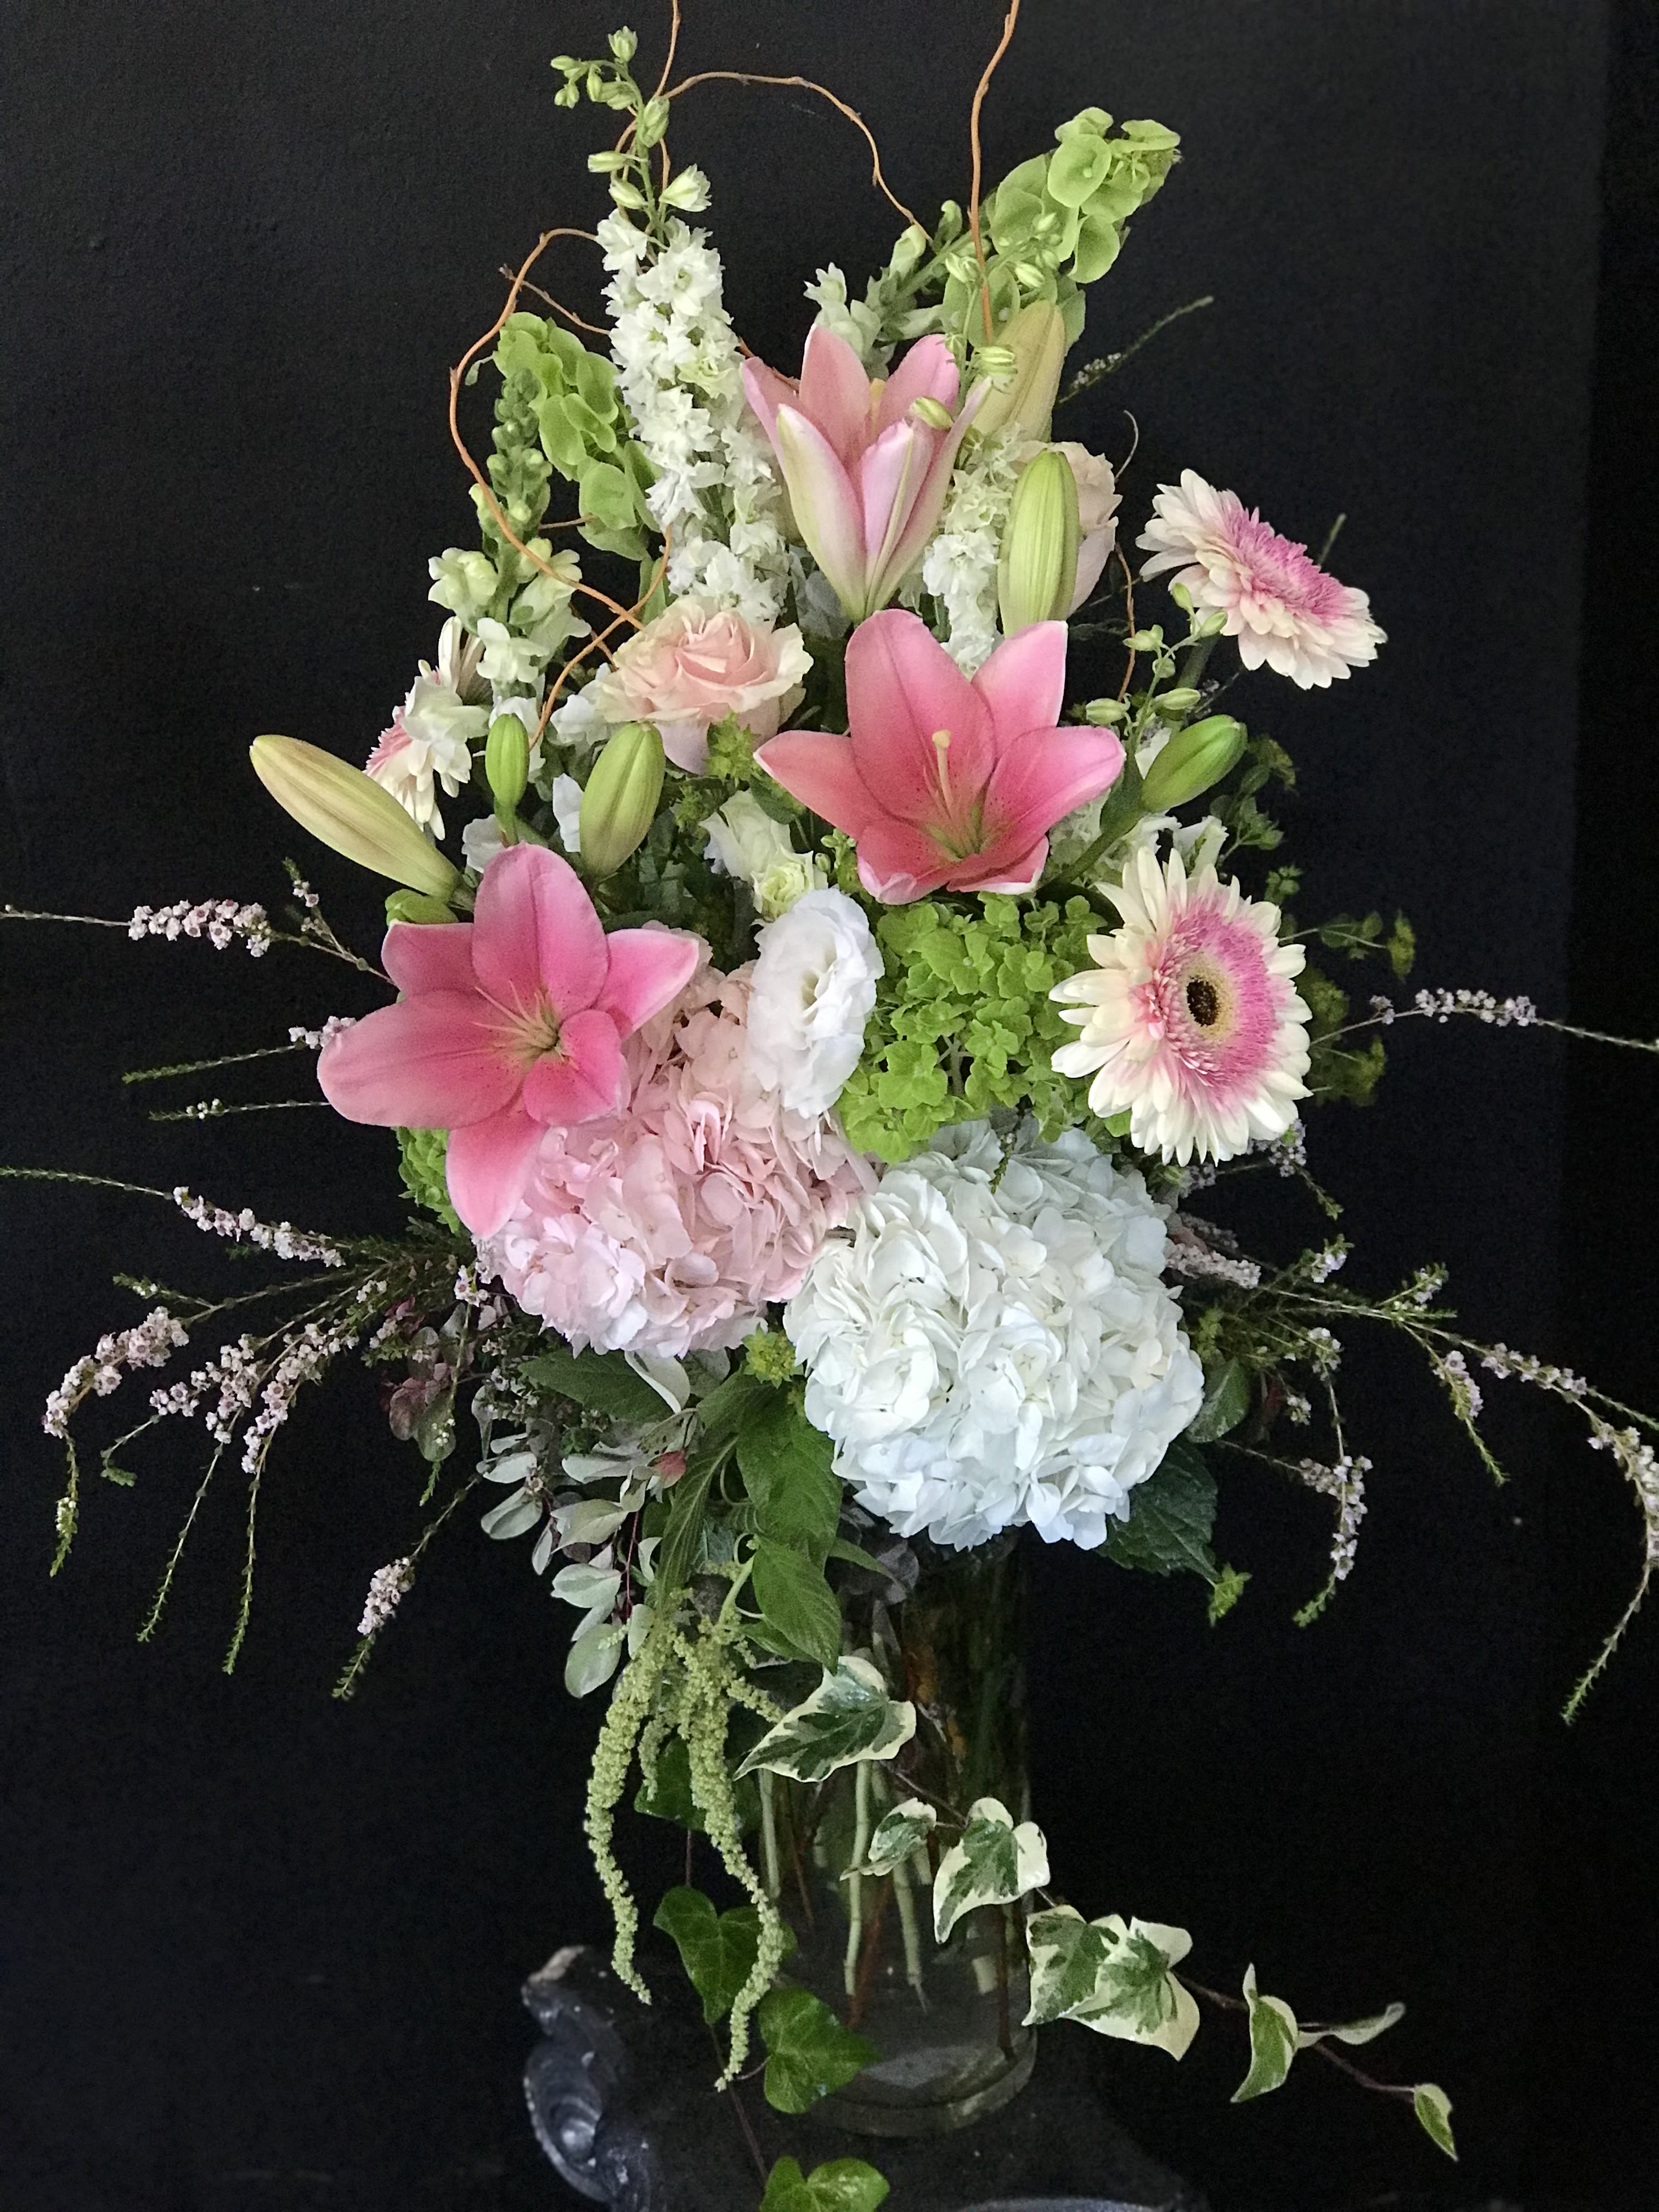 wonderful pink - green and white hydrangia with pink lily and pale pink gerbara dasie